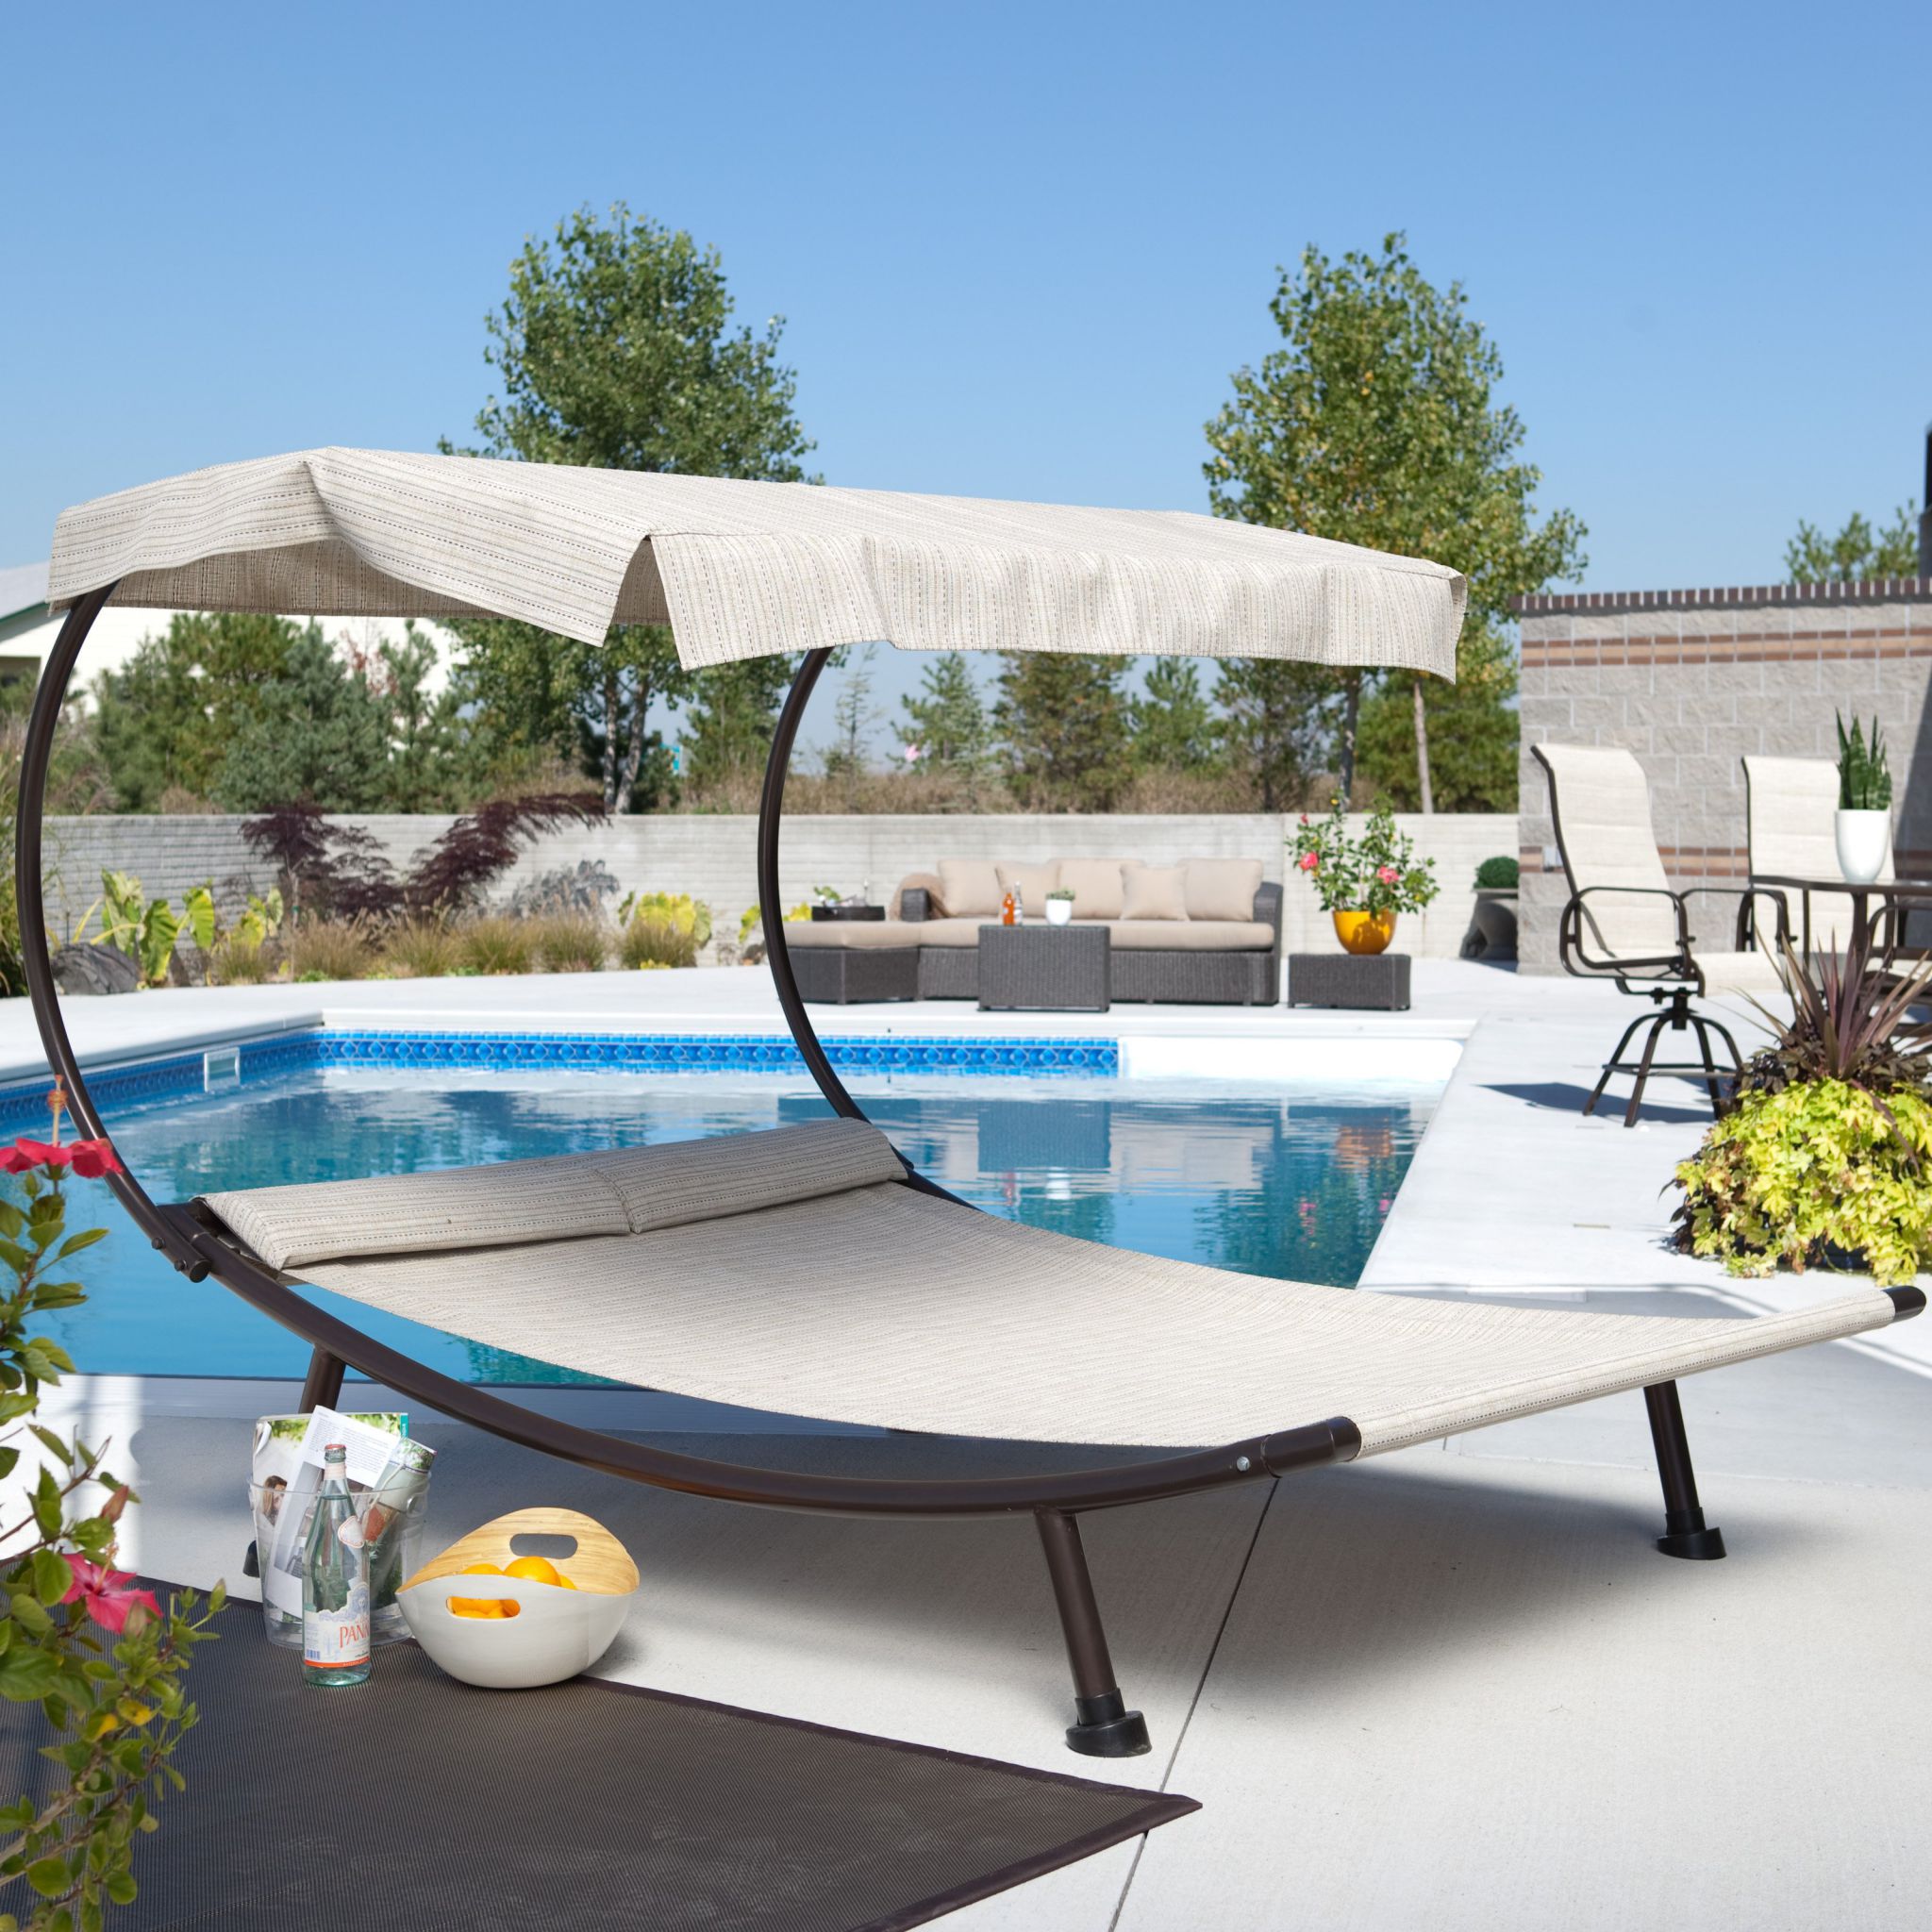 Canopy For Chaise Wide Canopy For Contemporary Outdoor Chaise Lounge With Metal Legs On Concrete Flooring Outdoor Outdoor Chaise Lounge For Backyard Pool